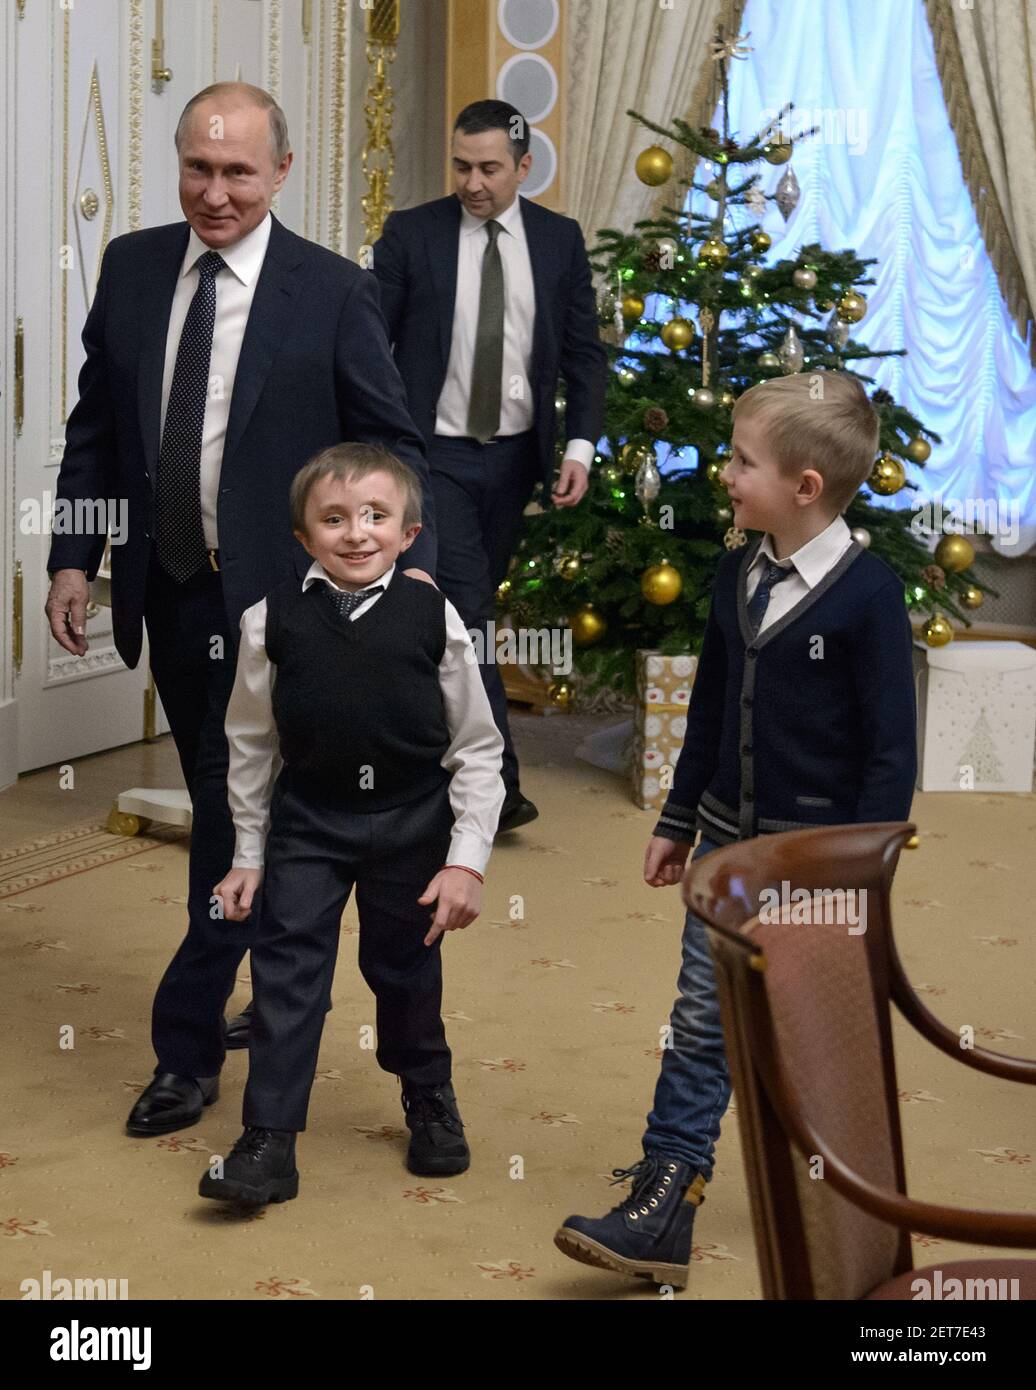 Working visit of Russian President Vladimir Putin to St. Petersburg. Russian President Vladimir Putin and Artem Palyanov (second left), a boy, whose dream Vladimir Putin promised to fulfill at the International Volunteer Forum on December 5, during a meeting in the Konstantinovsky Palace. 14-year-old 'crystal boy' Artem Palyanov from the village of Taitsy asked for a helicopter tour over St. Petersburg. December 15, 2018. Russia, St. Petersburg. Photo credit: Dmitry Azarov/Kommersant/Sipa USA  Stock Photo